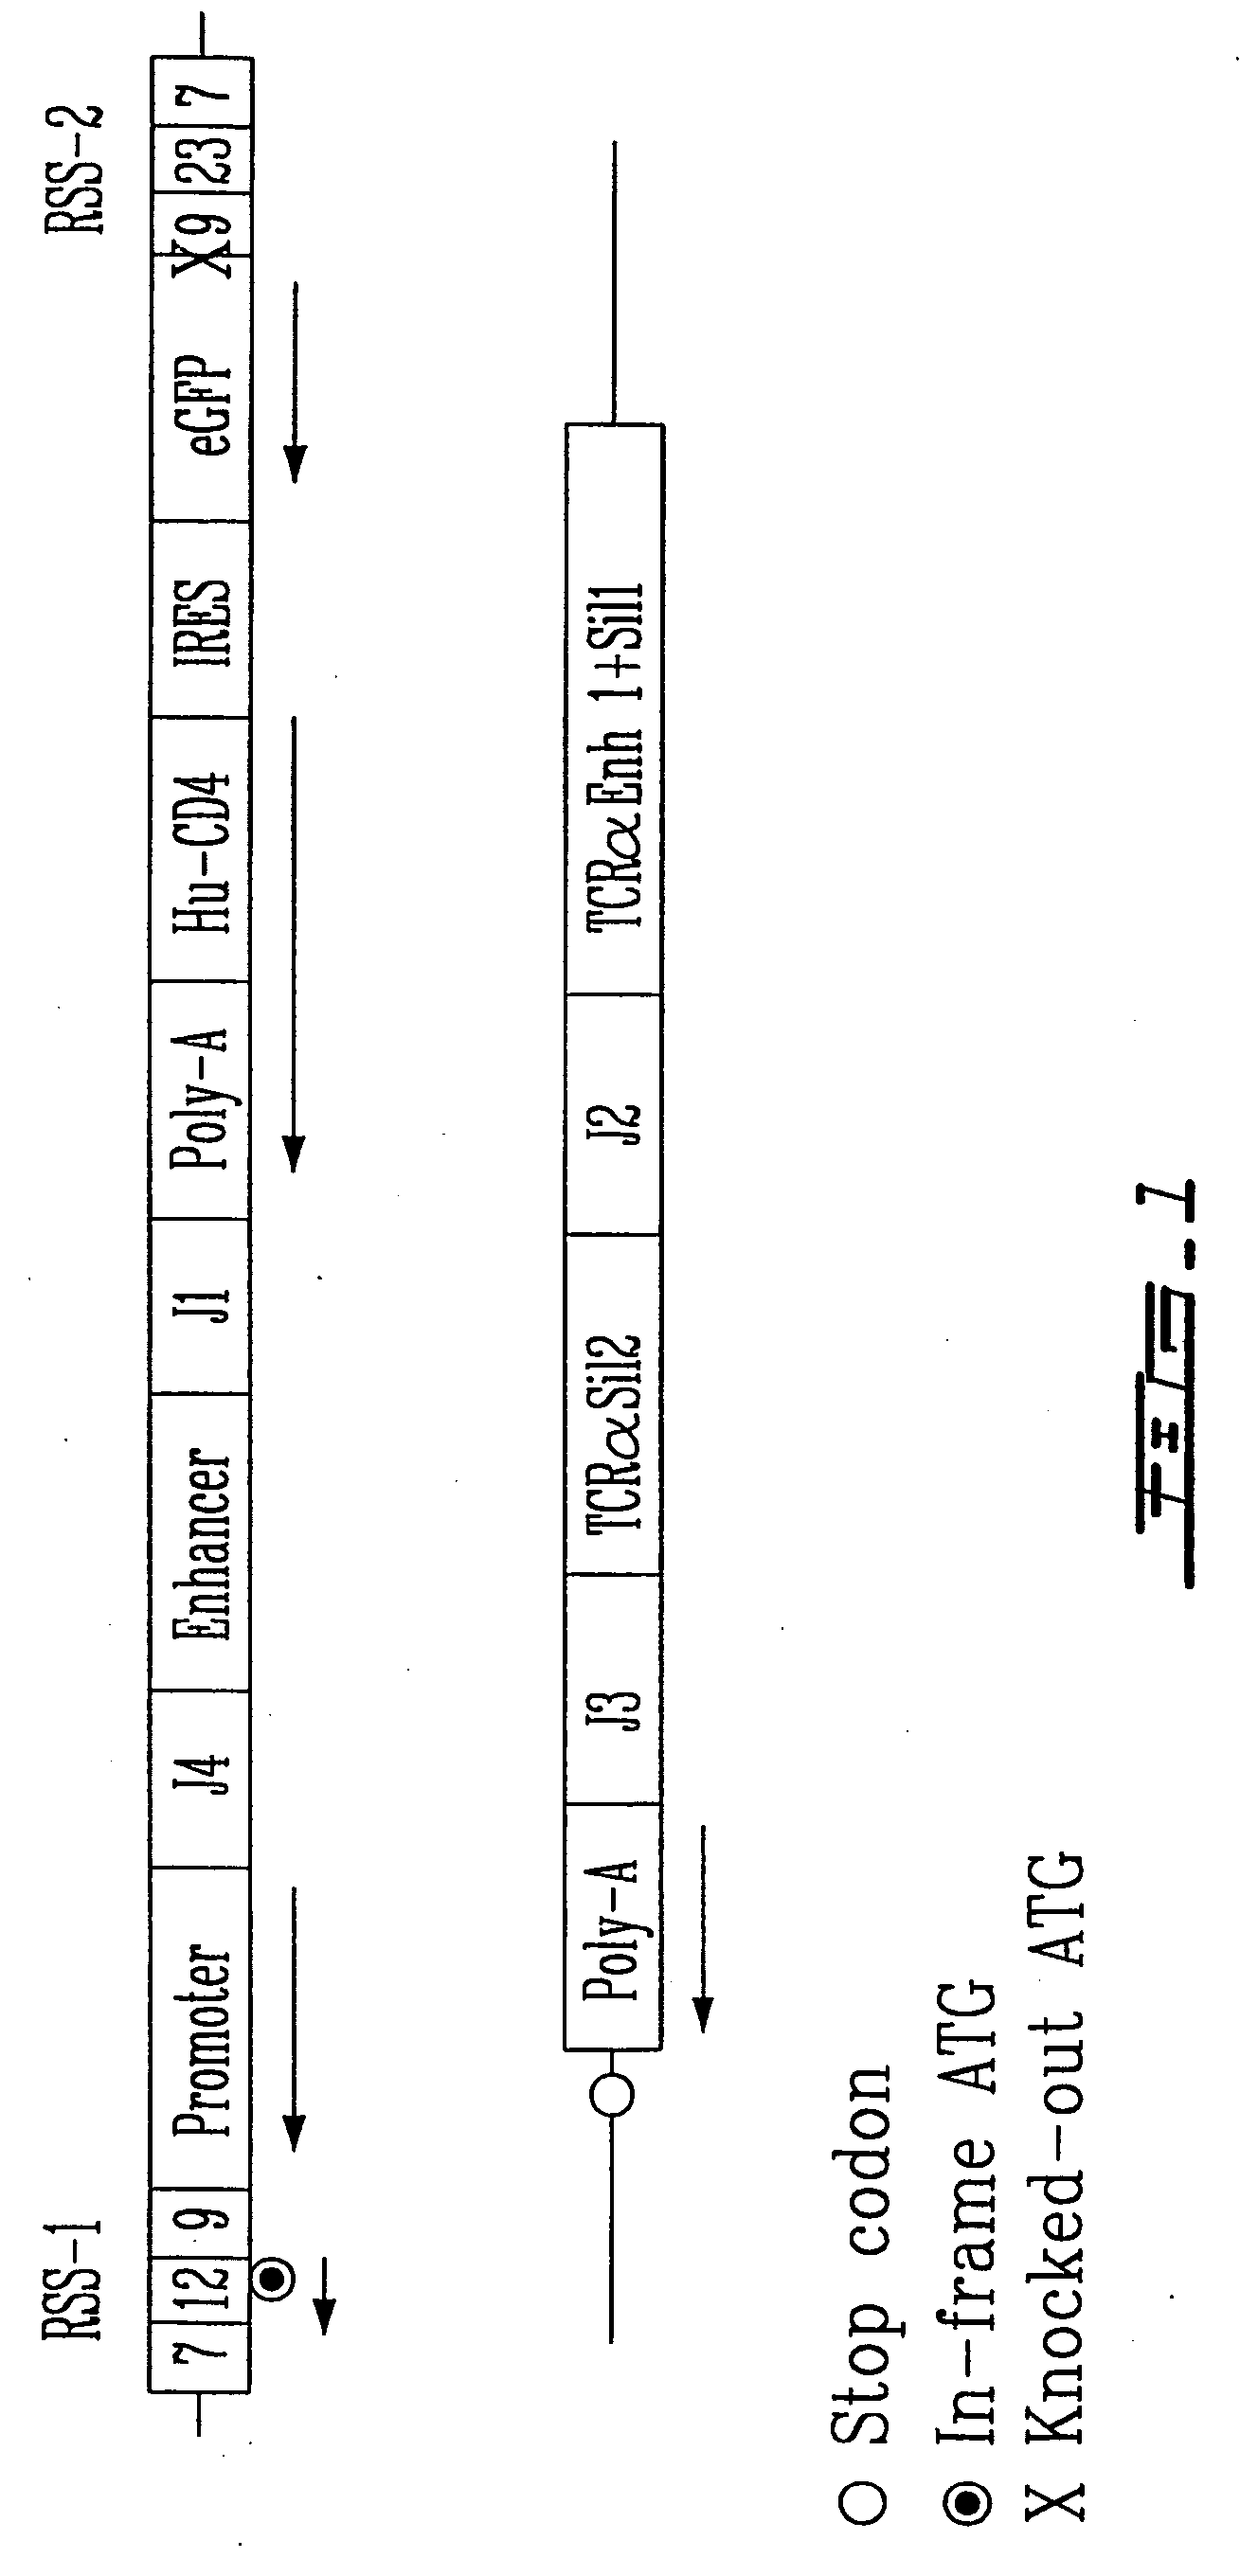 Dna construct for assessing thymic function activity and therapeutical uses thereof